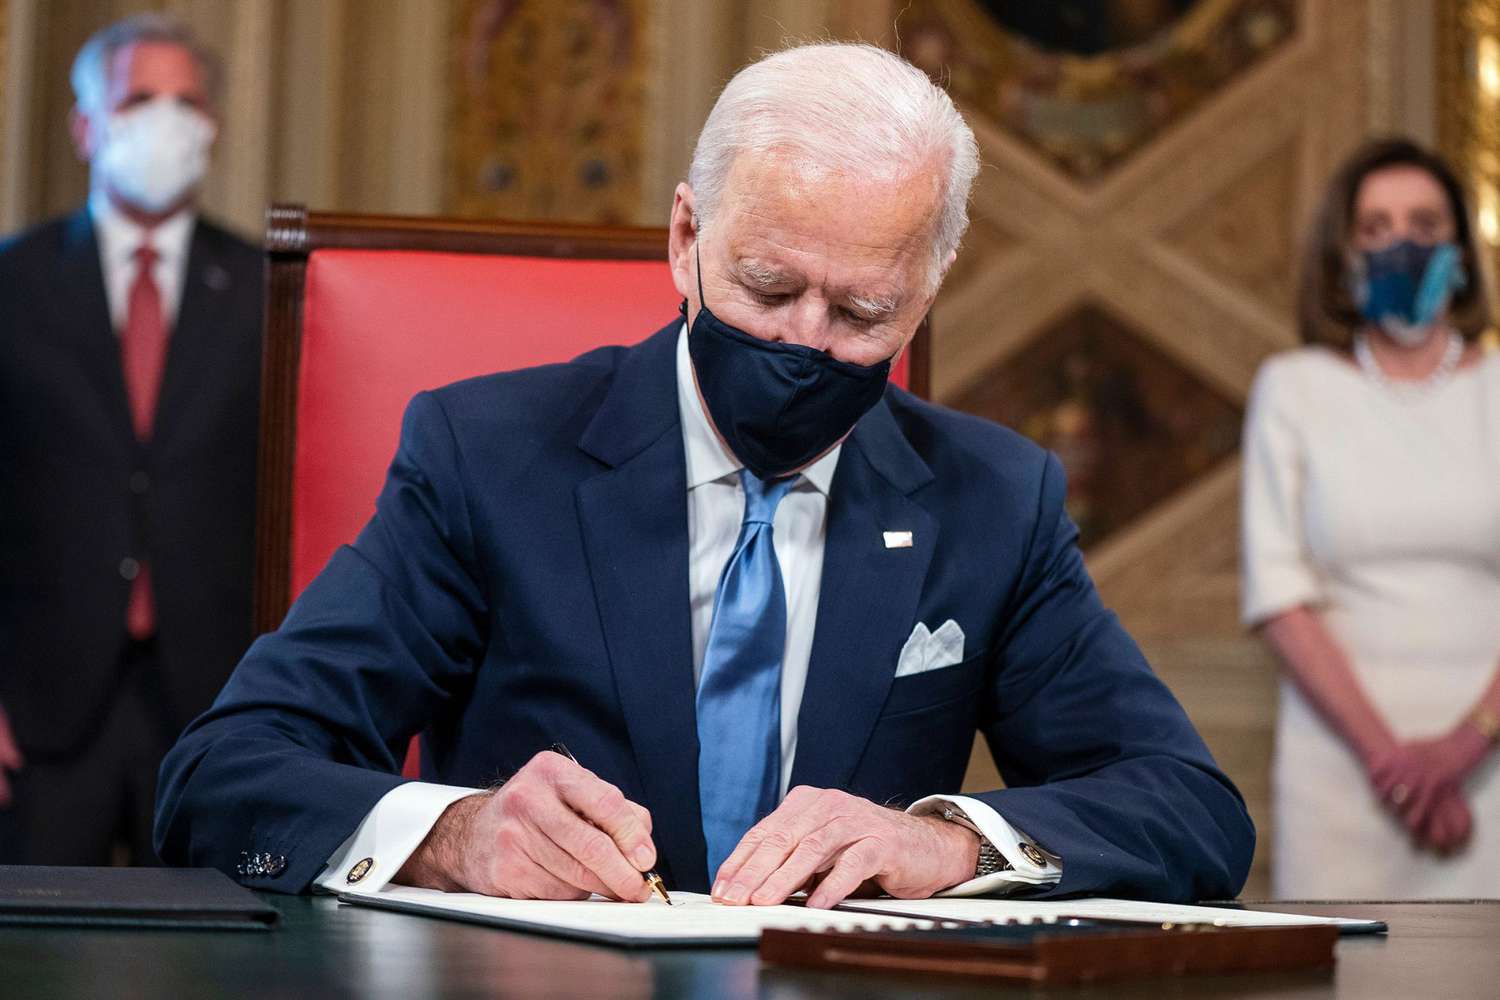 President Joe Biden signs three documents including an inauguration declaration, cabinet nominations and sub-cabinet nominations in the President's Room at the US Capitol after the inauguration ceremony, at the U.S. Capitol in Washington